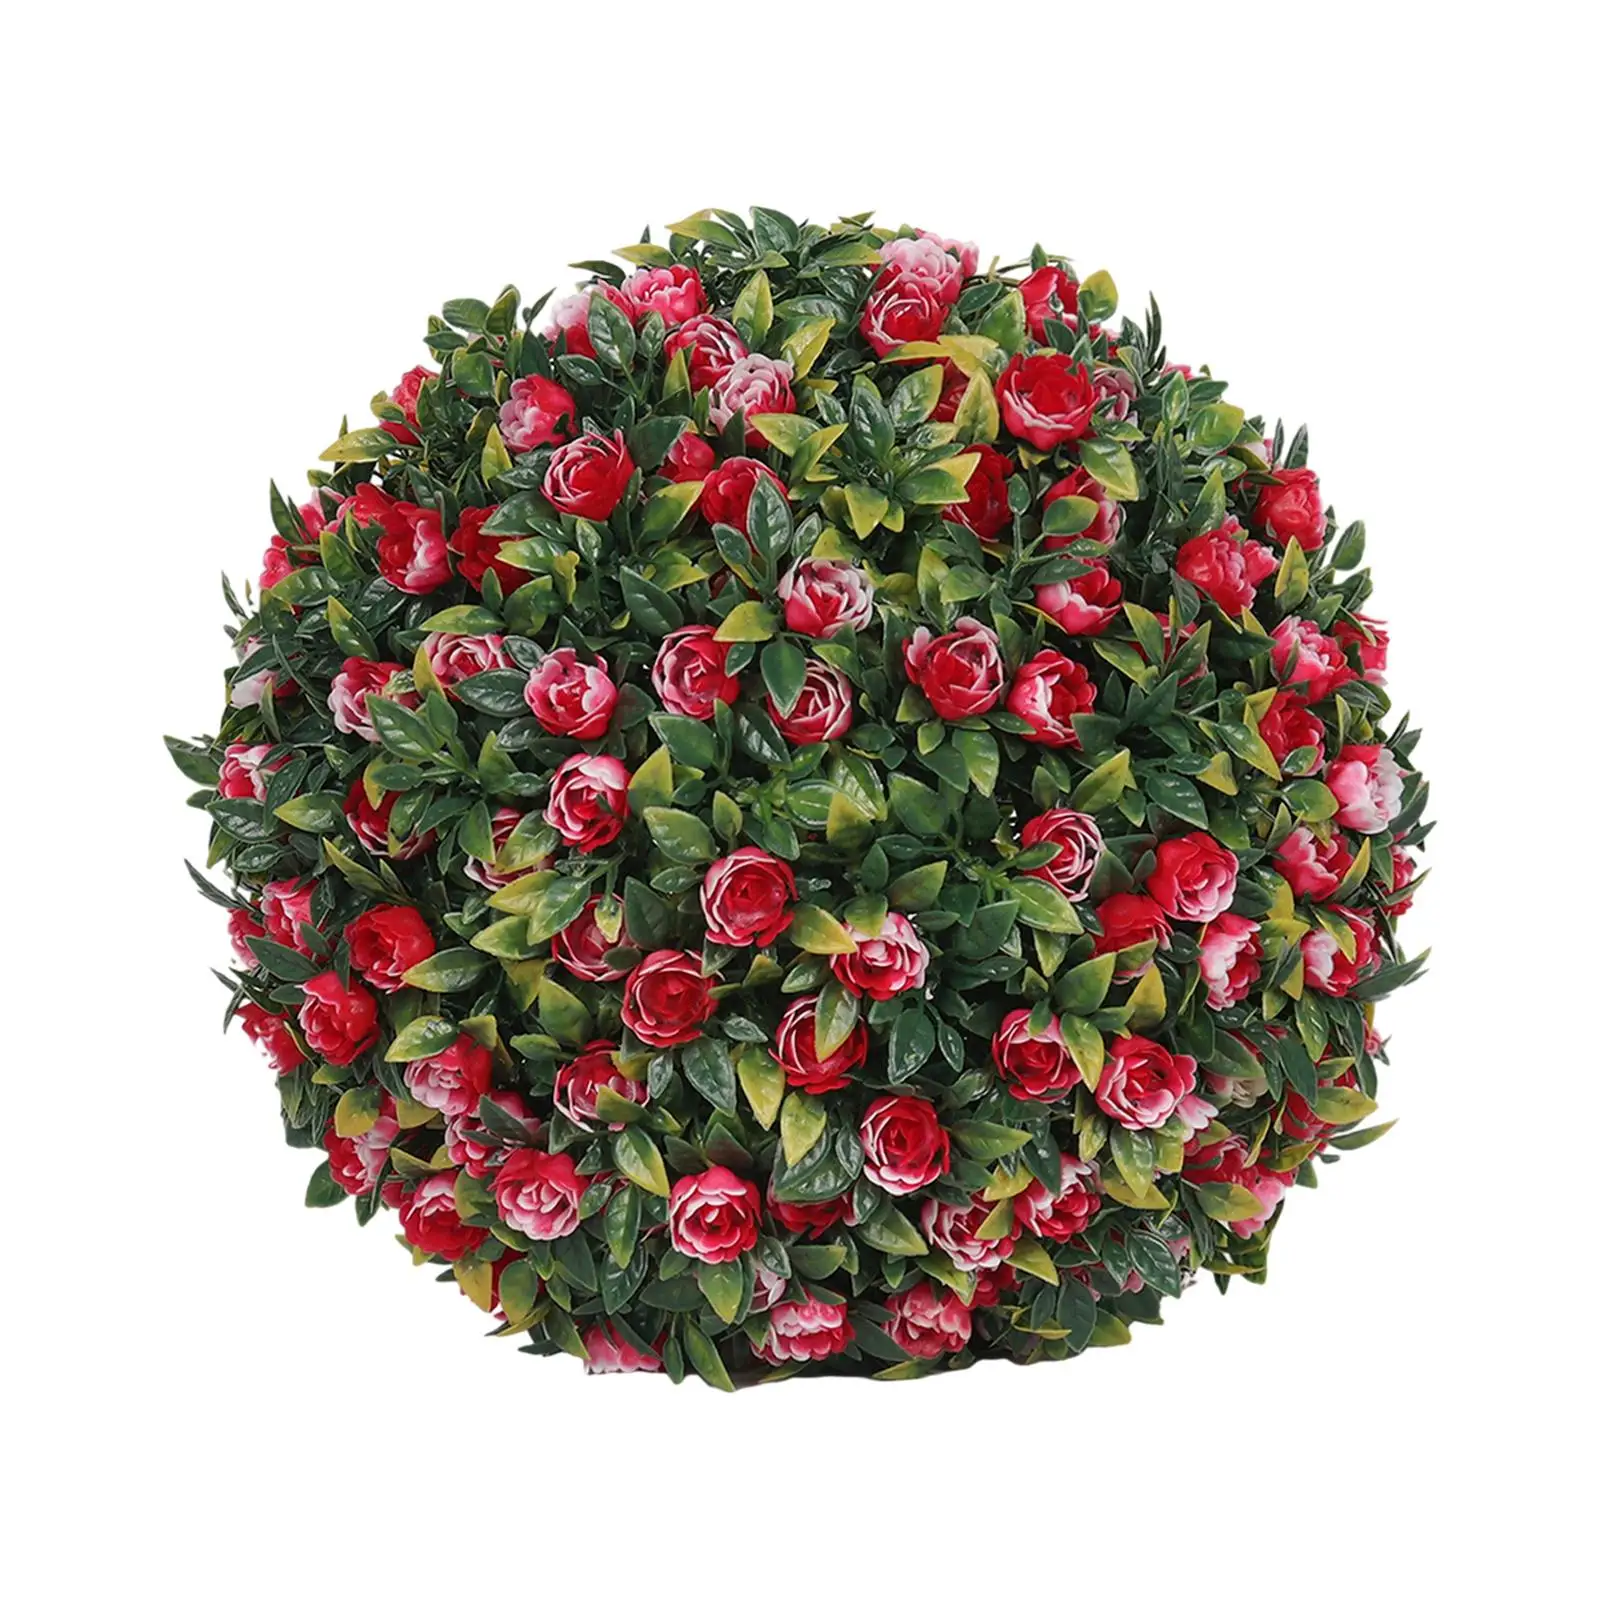 Simulation Plant Flower Hanging Topiary Ball 7.8inch Sturdy Convenient Assemble Versatile Floral Decoration for Outdoor Patio